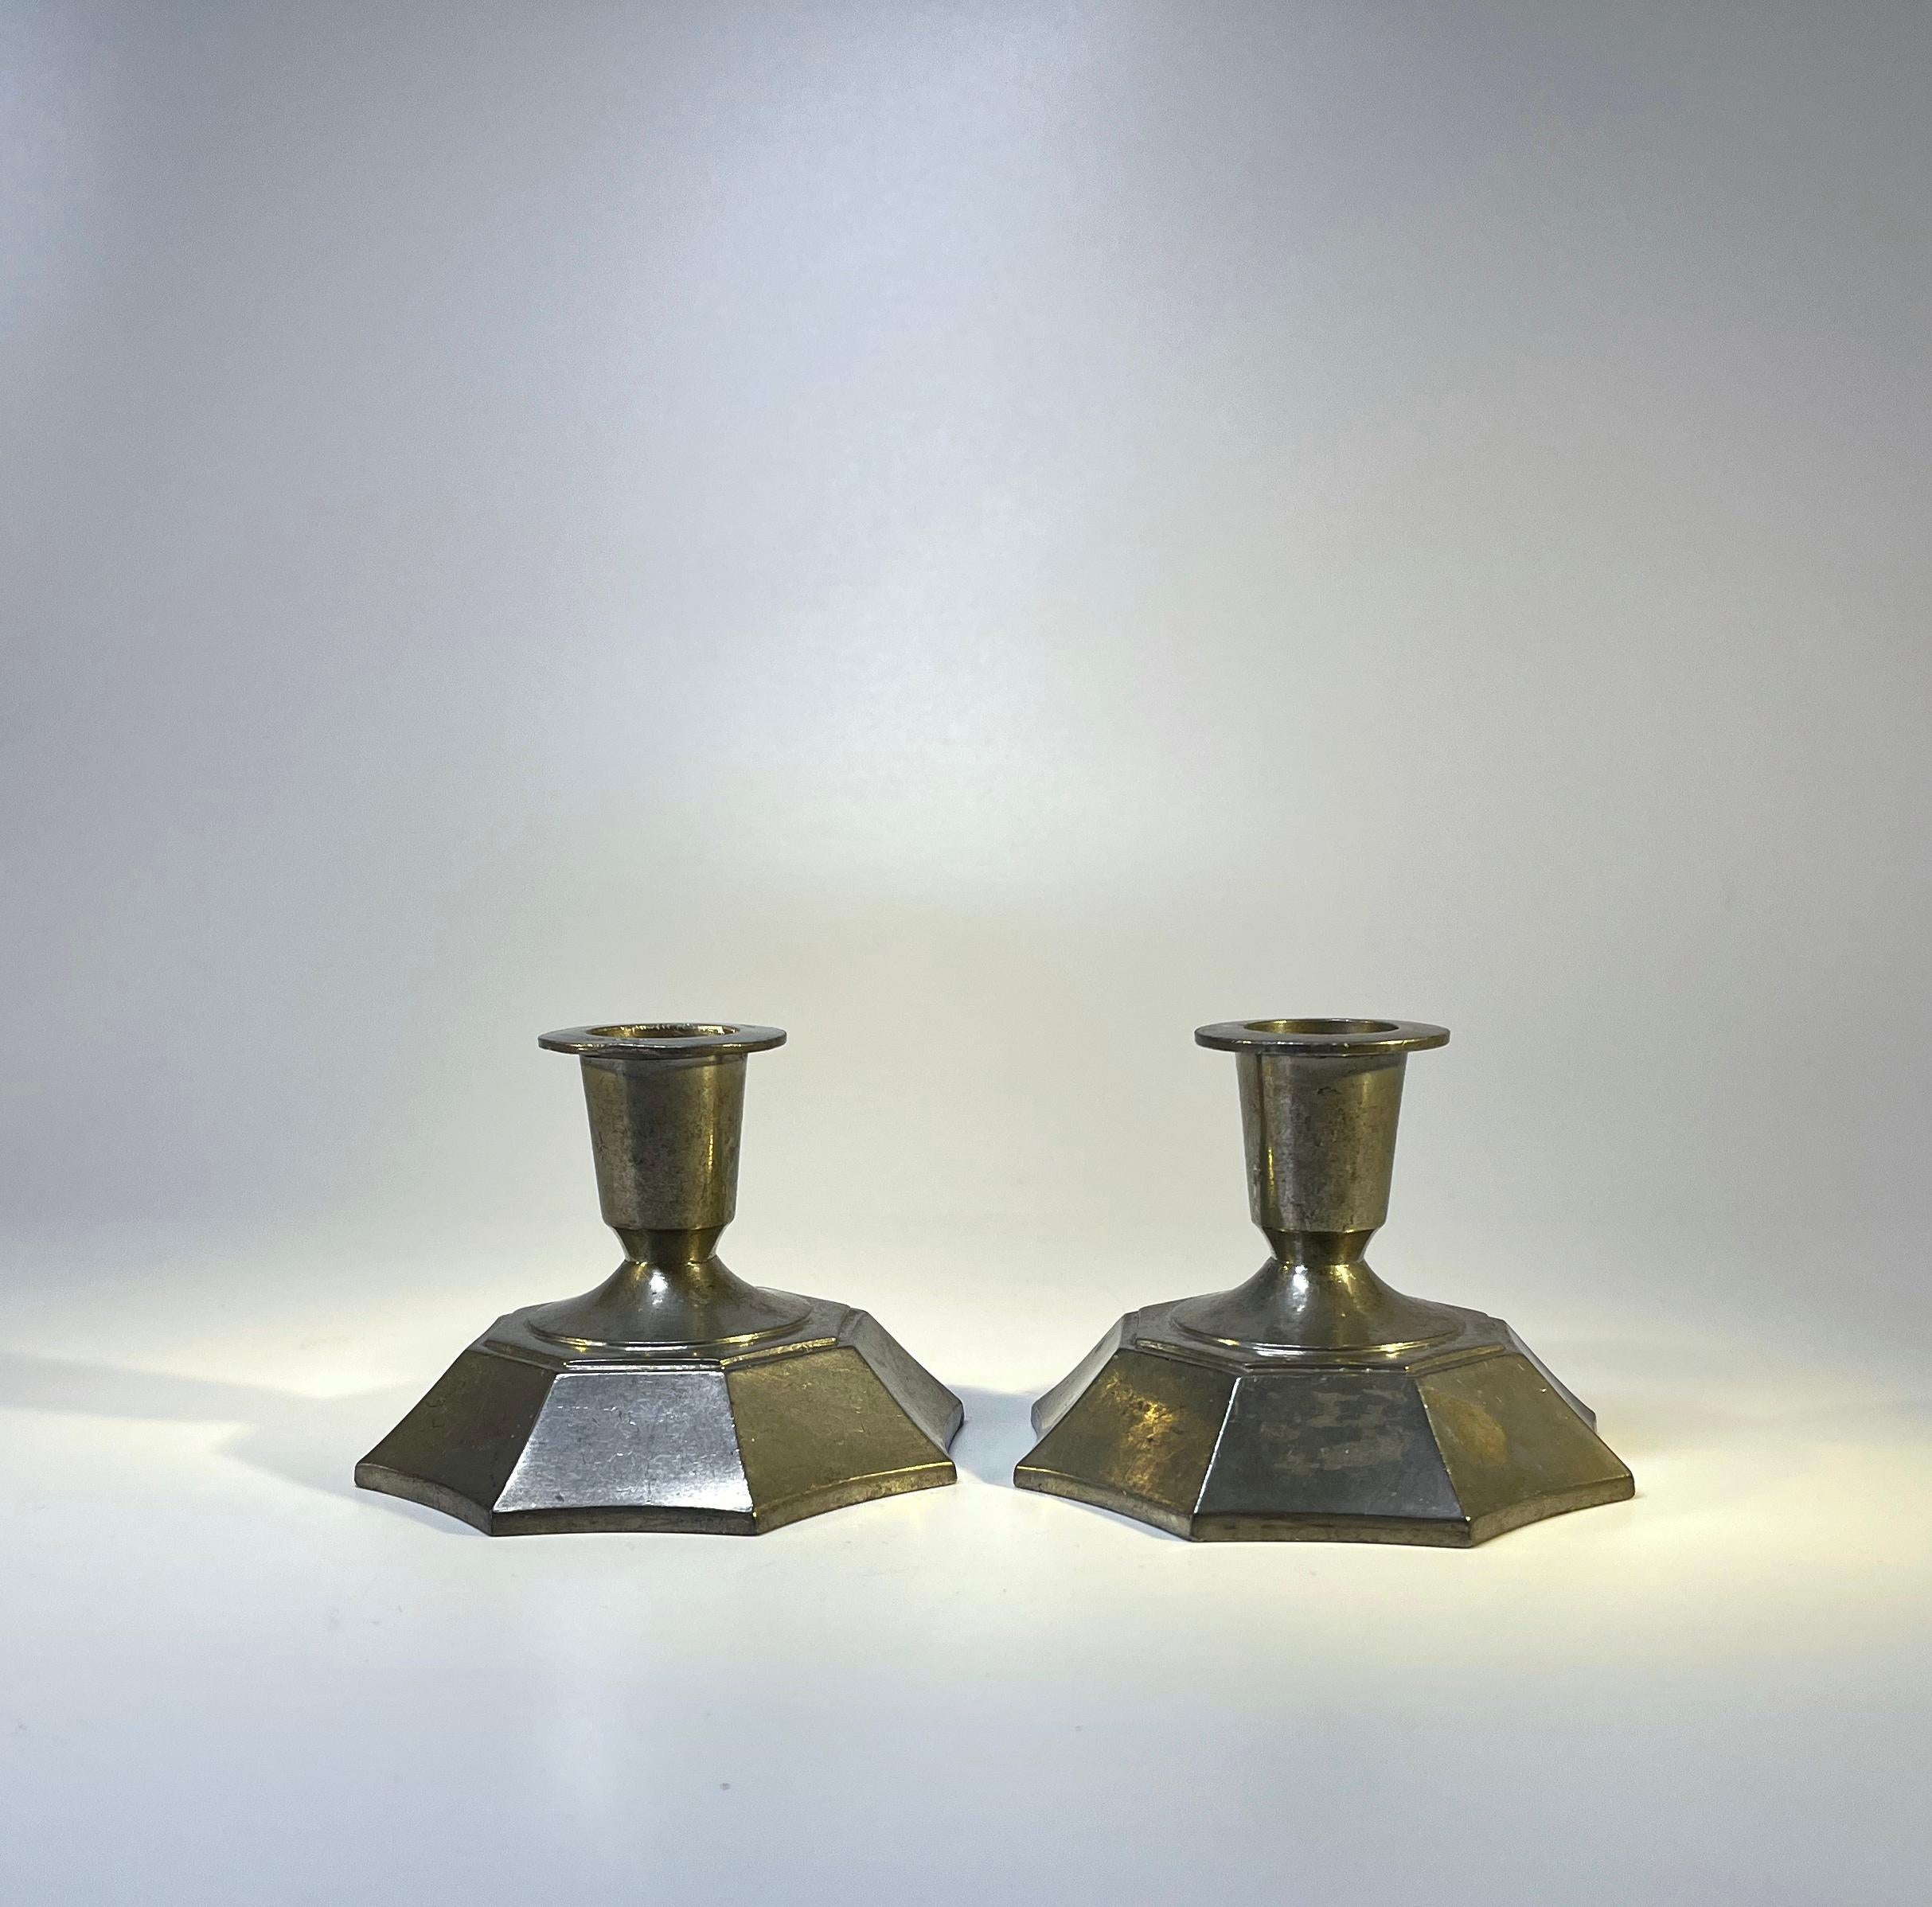 Hexagonal pair of Just Andersen pewter candlesticks. Circa 1930's
Stamped and numbered 1017 on bases
Height 2.5 inch, Diameter 3.25 inch, 
In good, sound condition 